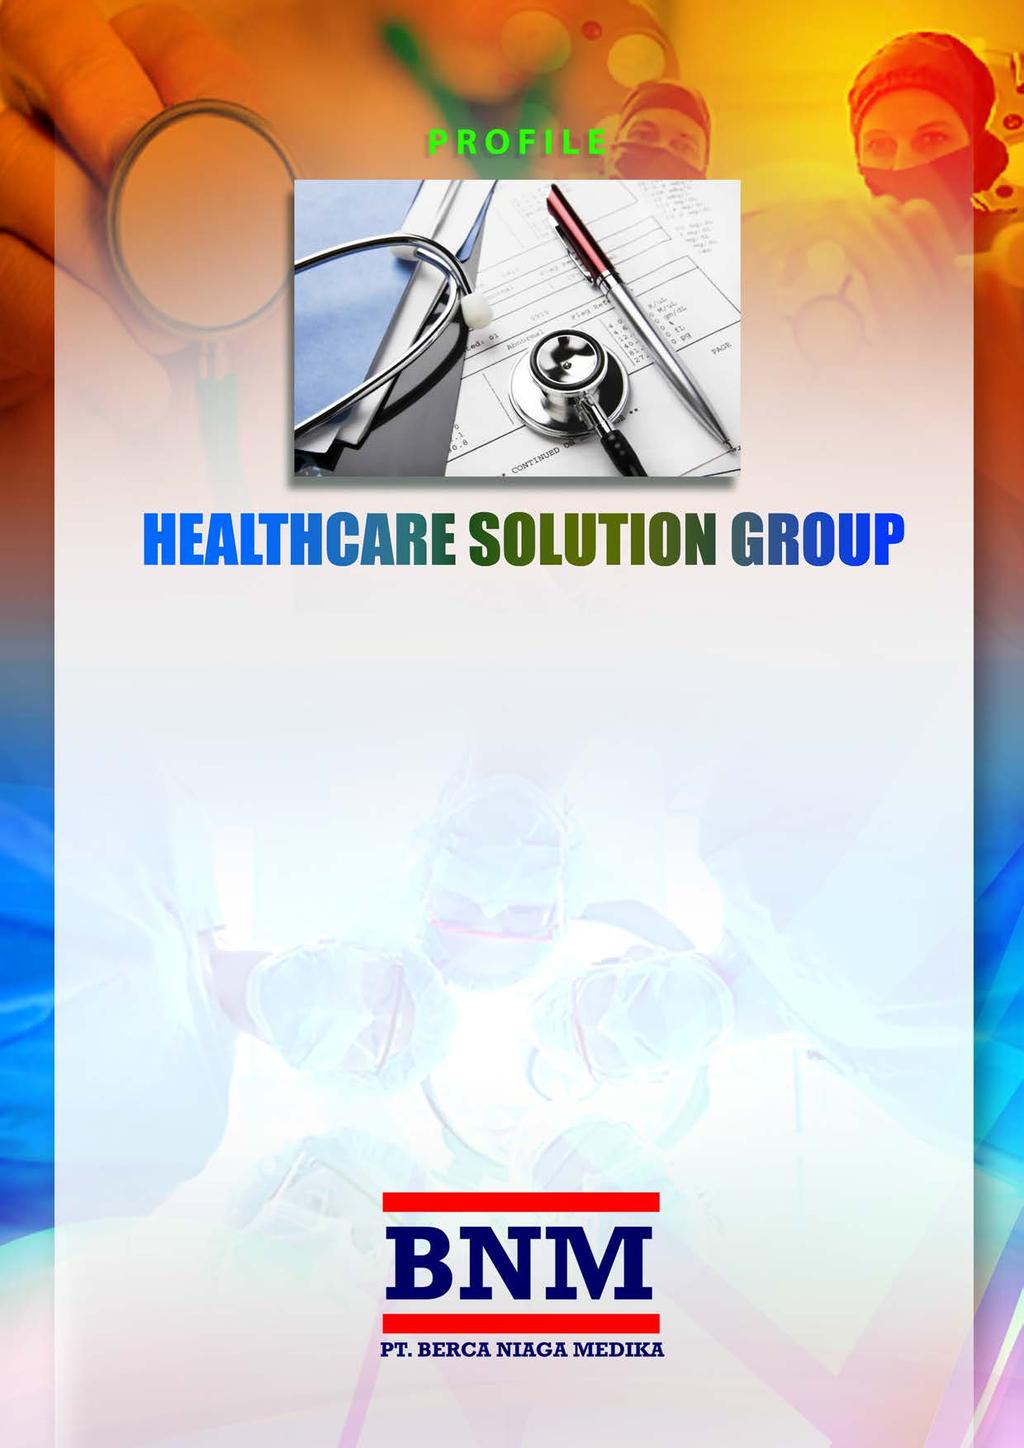 healthcare solution group HSG provides Healthcare Solution and Customer focus for Diagnostics & Clinical informatic with High Quality products excellent after sales service and customer education